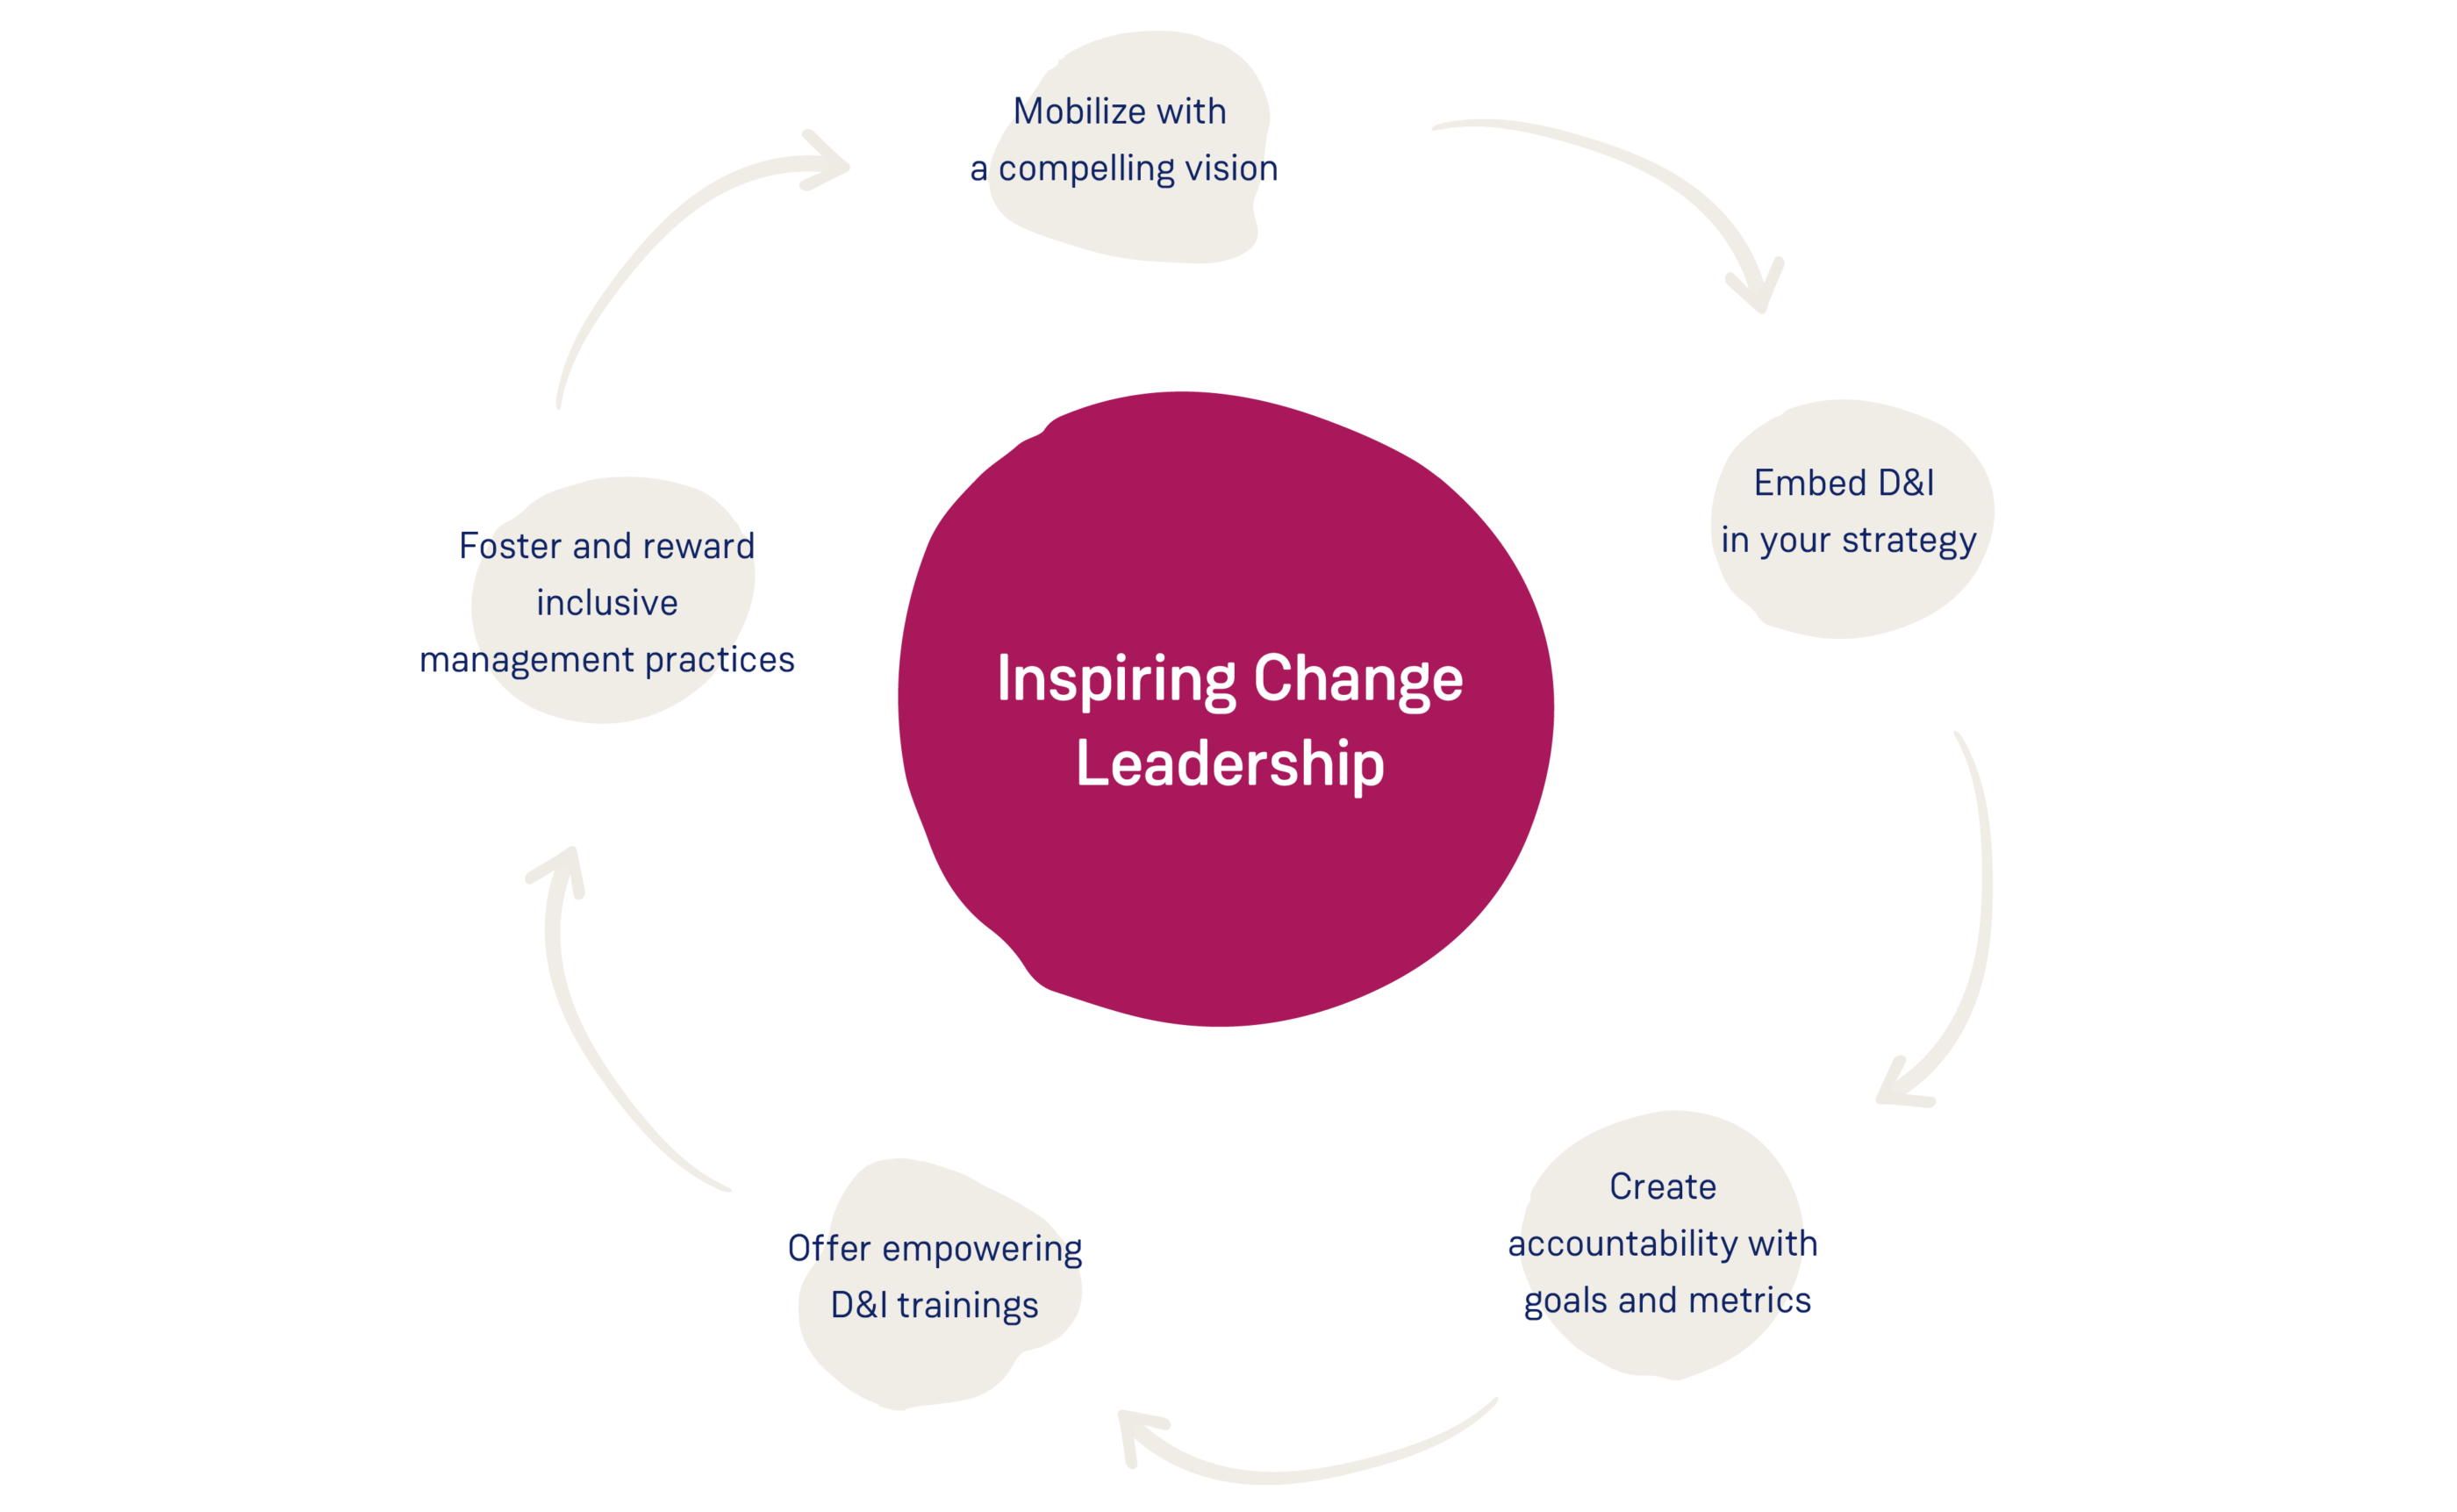 Leadership and Training as Drivers of Change